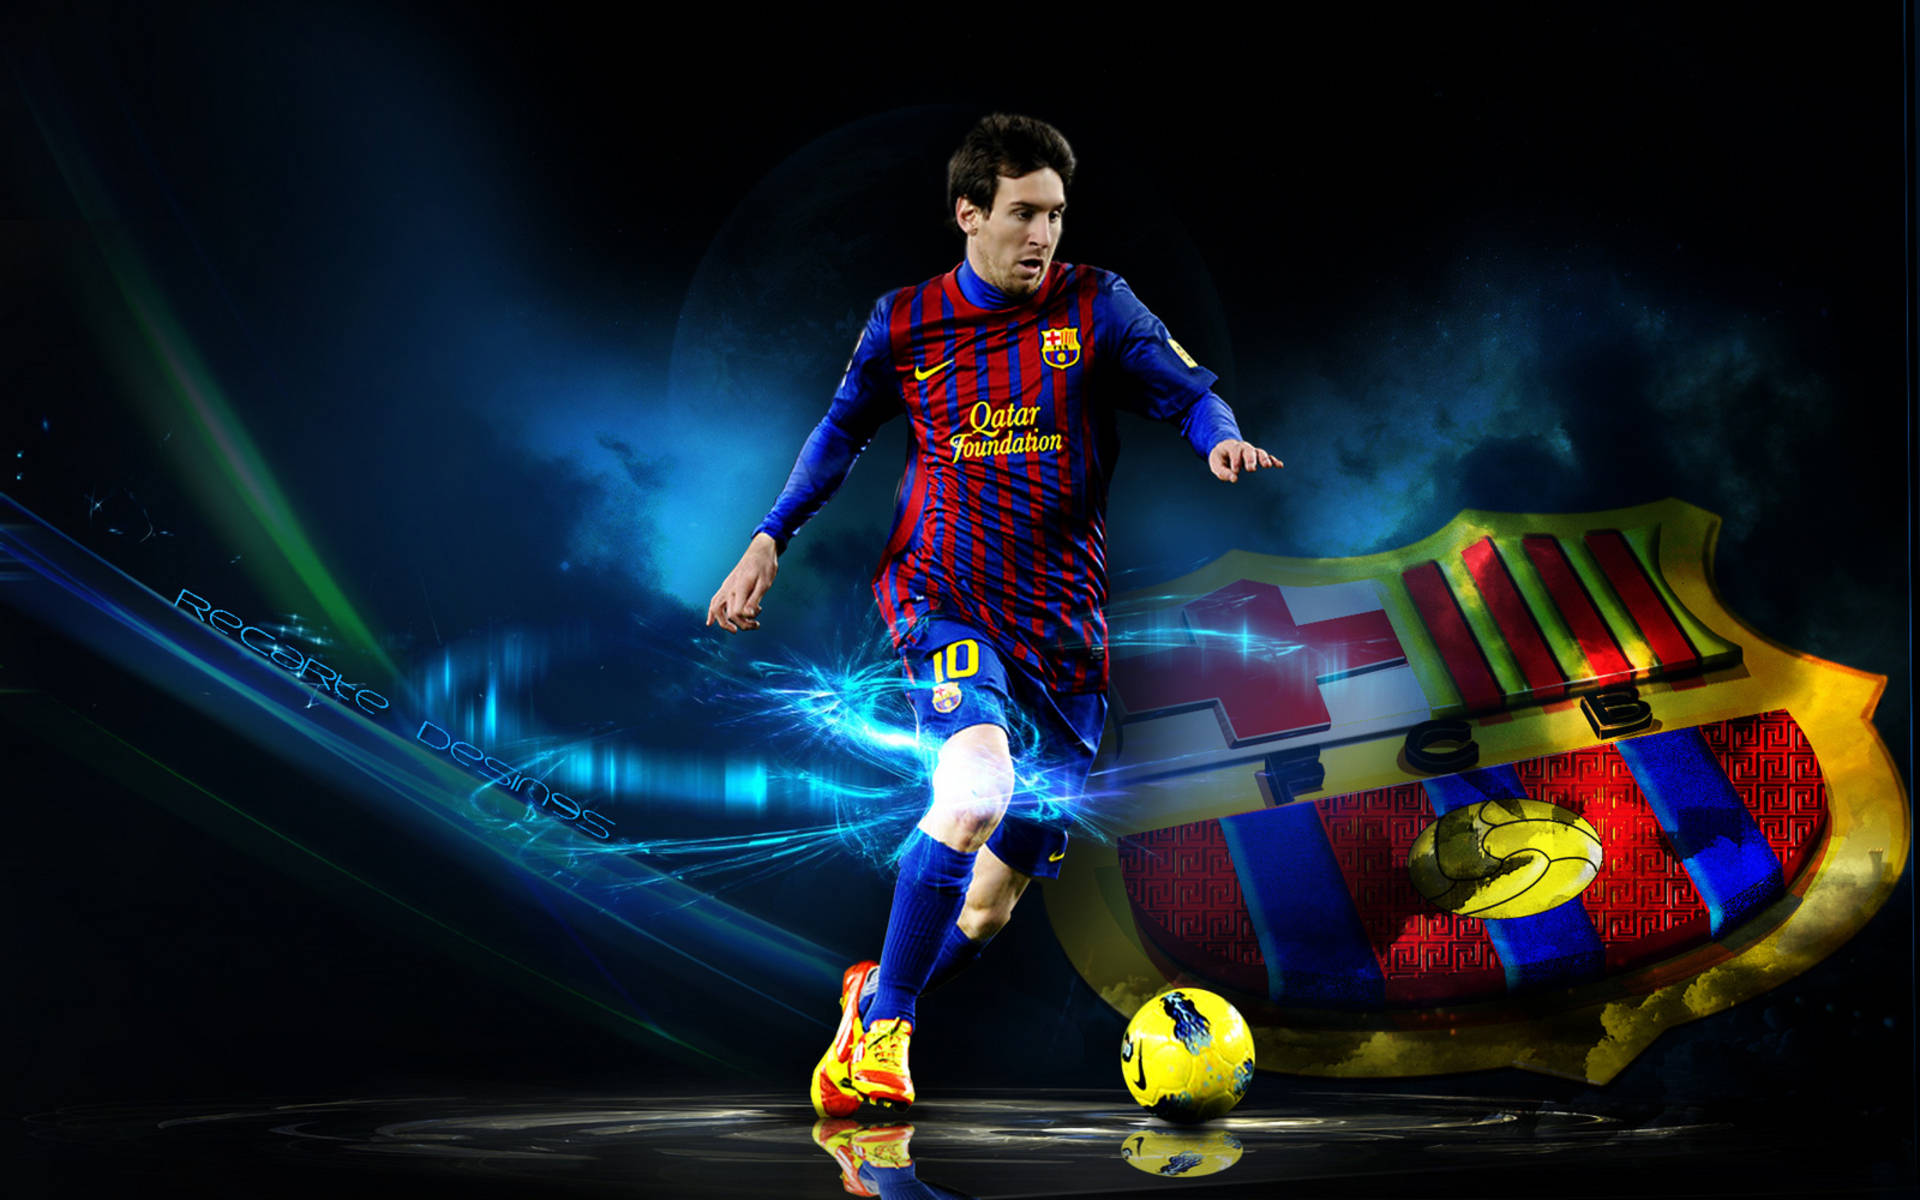 Messi 1920X1200 Wallpaper and Background Image